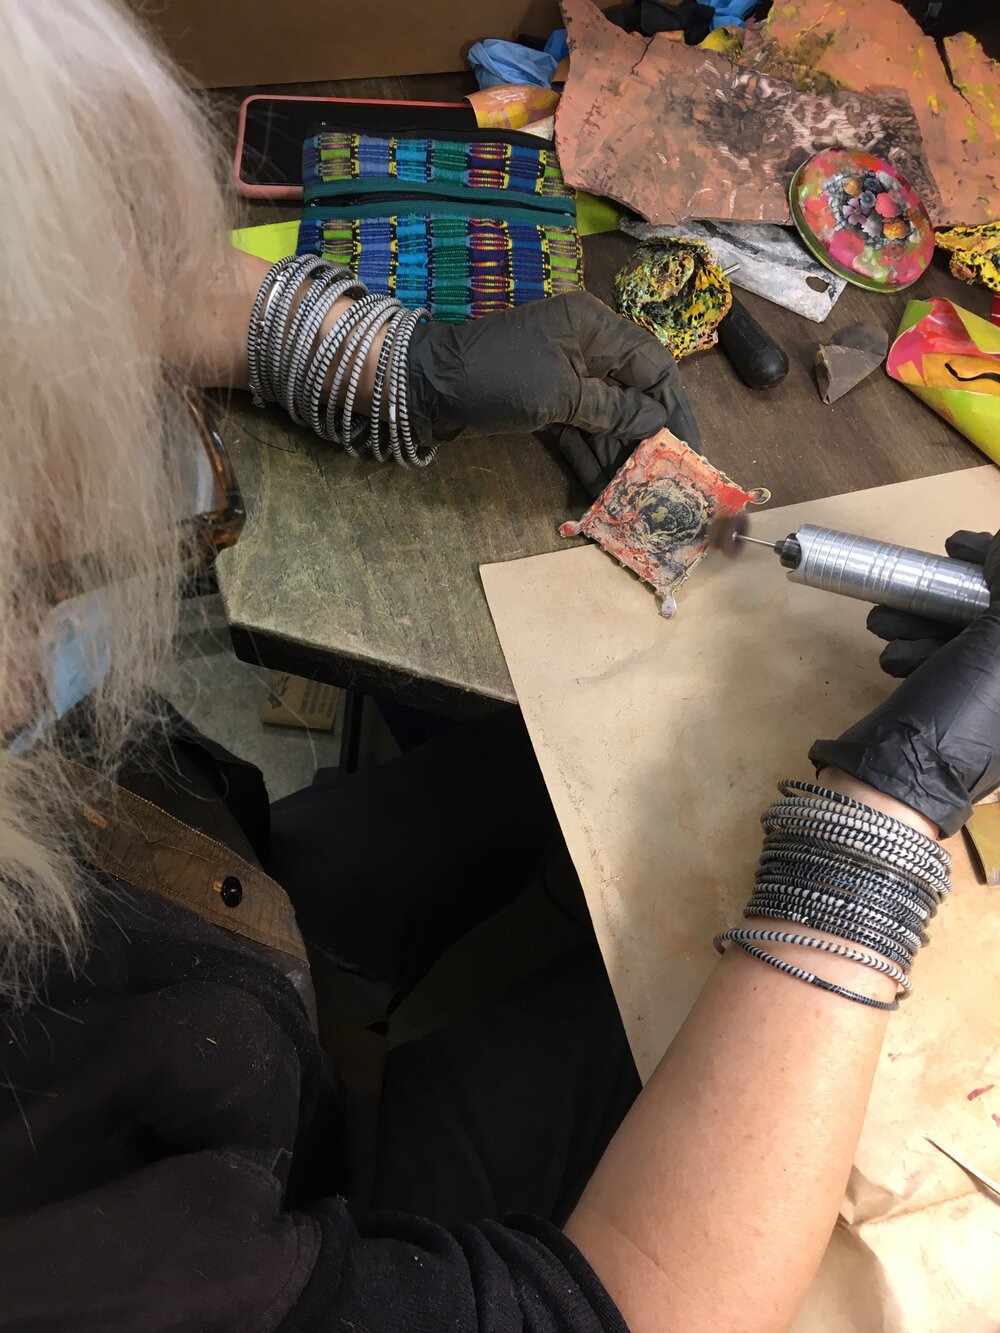  Sally hard at work transforming some old objects in the Paint+Metal workshop. 